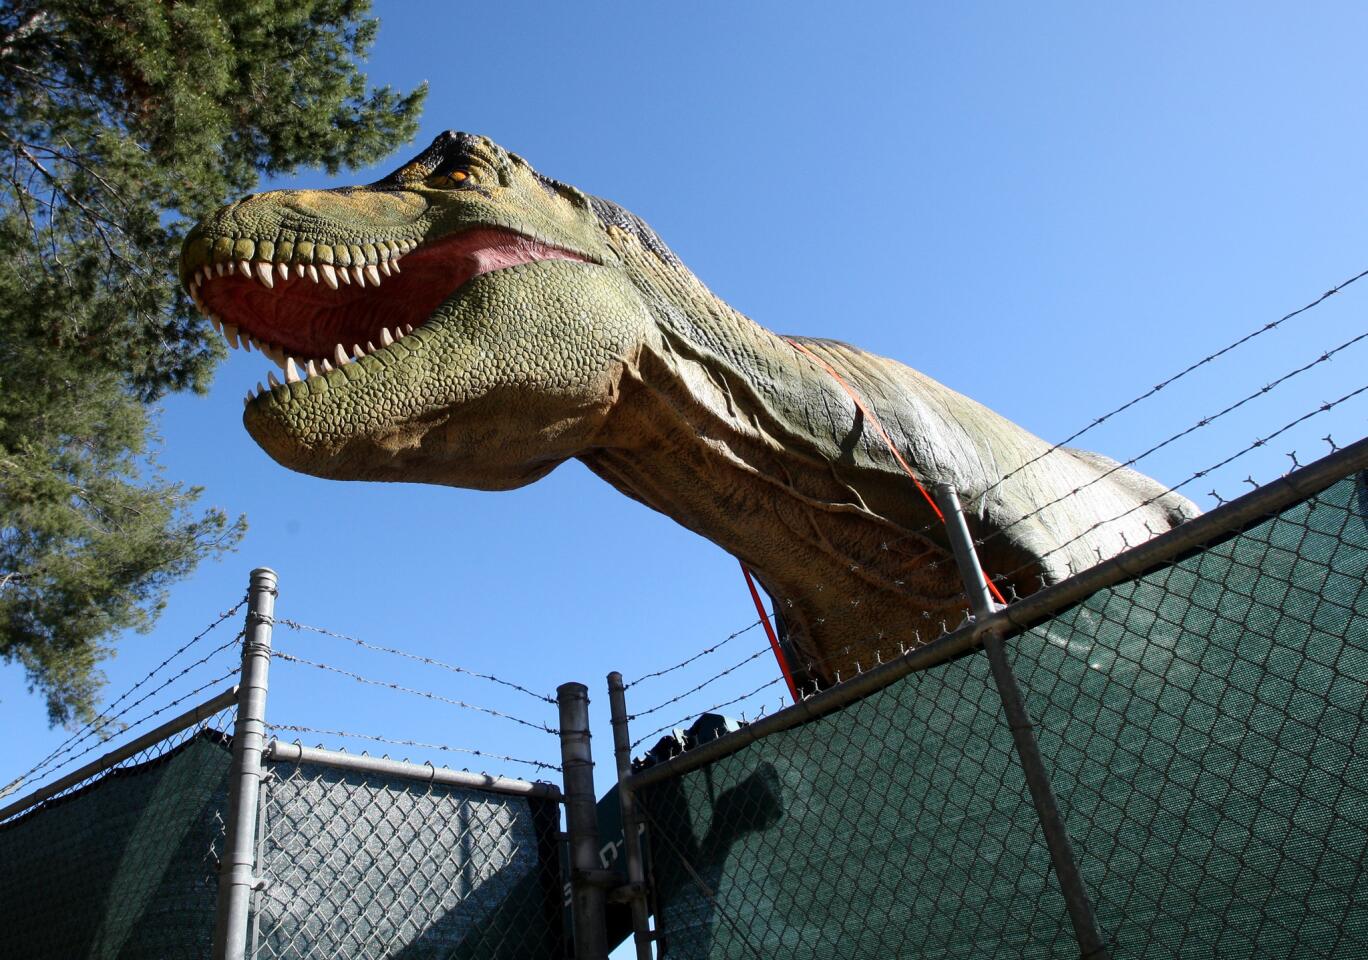 A Tyrannosaurus Rex seems to be looking over a high fence as it is unloaded and placed at its new location for the upcoming Dinosaurs: Unextinct at the L.A. Zoo exhibit at the L.A. Zoo in L.A. on Tuesday, March 29, 2016. The Animatronic, life-size prehistoric creatures will take visitors back in time starting April 15th. There will be 17 life-size, life-like dinosaurs on display.